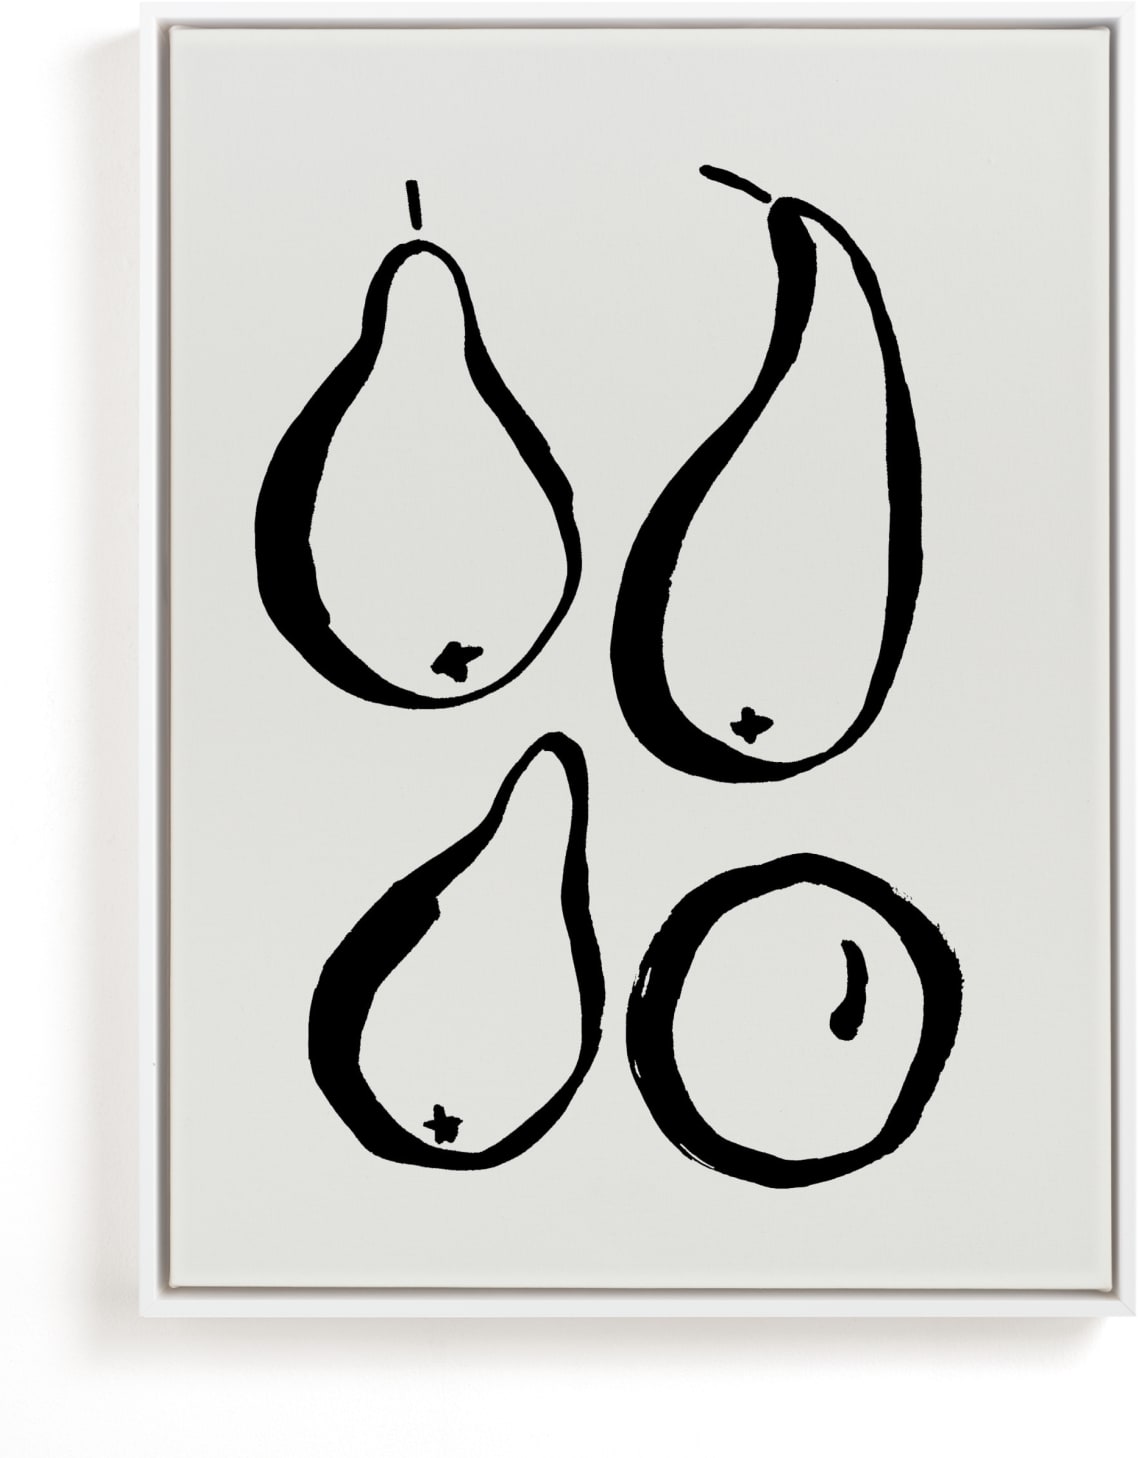 This is a black and white art by Sonya Percival called Still-life with four pears.